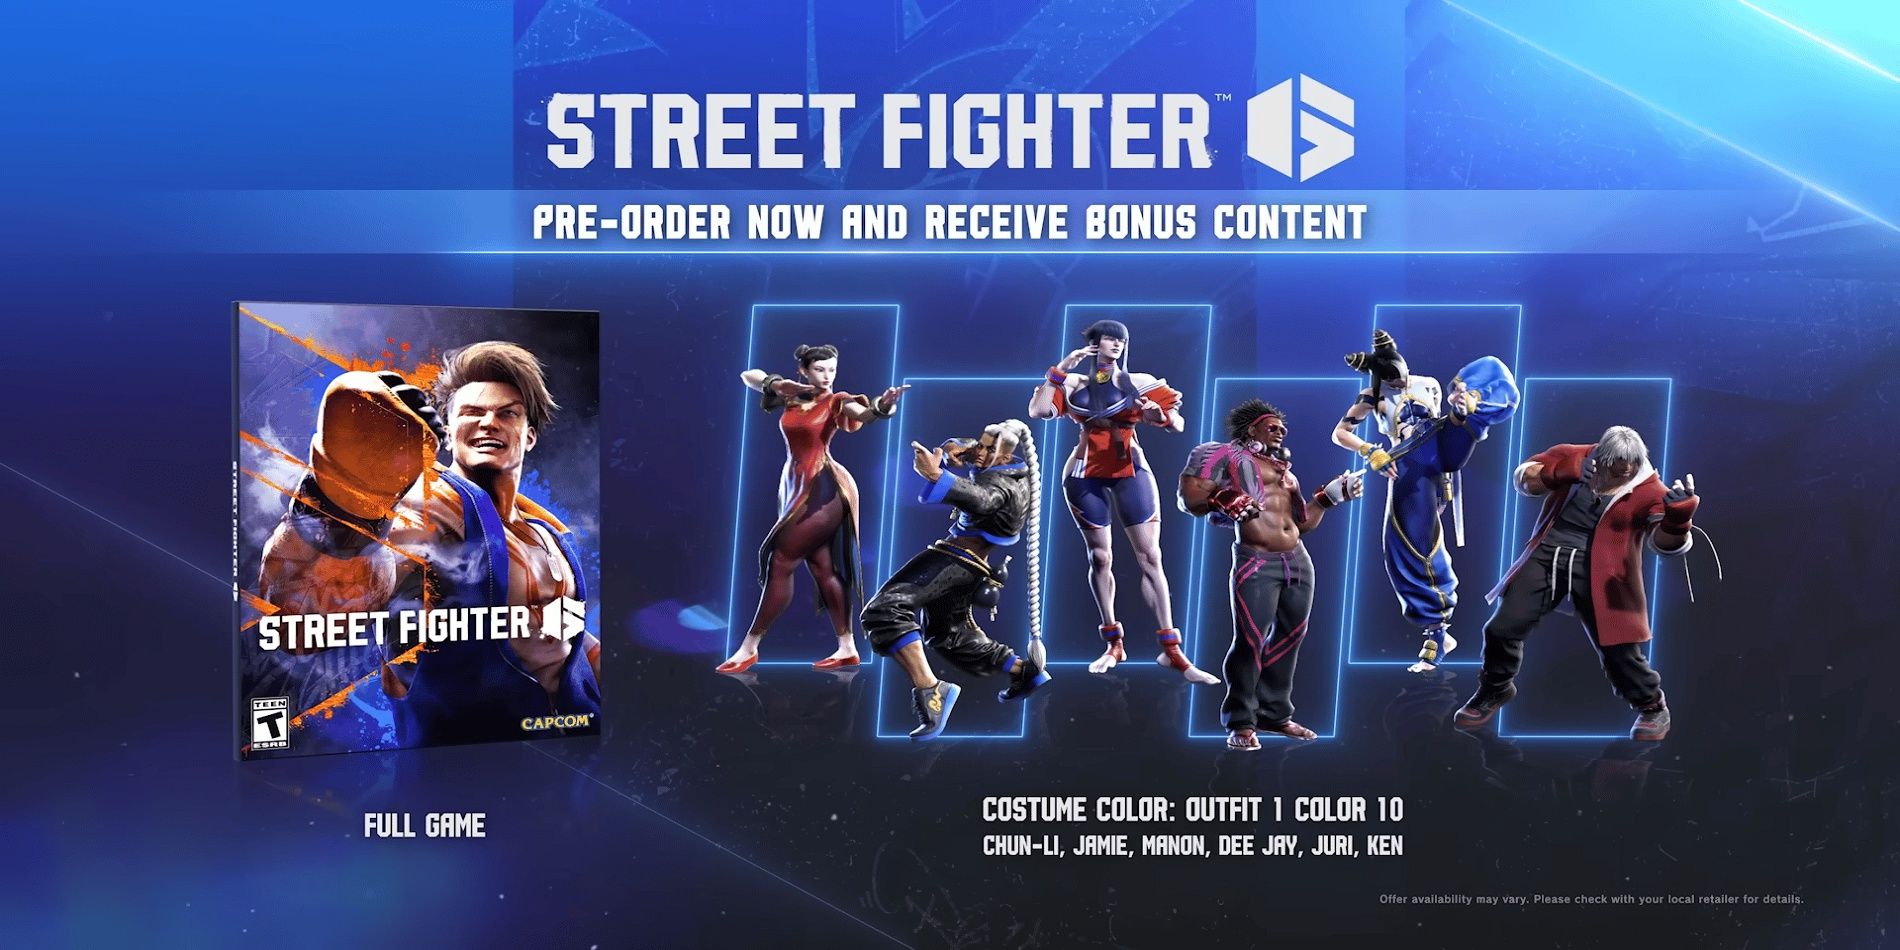 Street Fighter 6 preorder bonus content consisting of different character color costumes